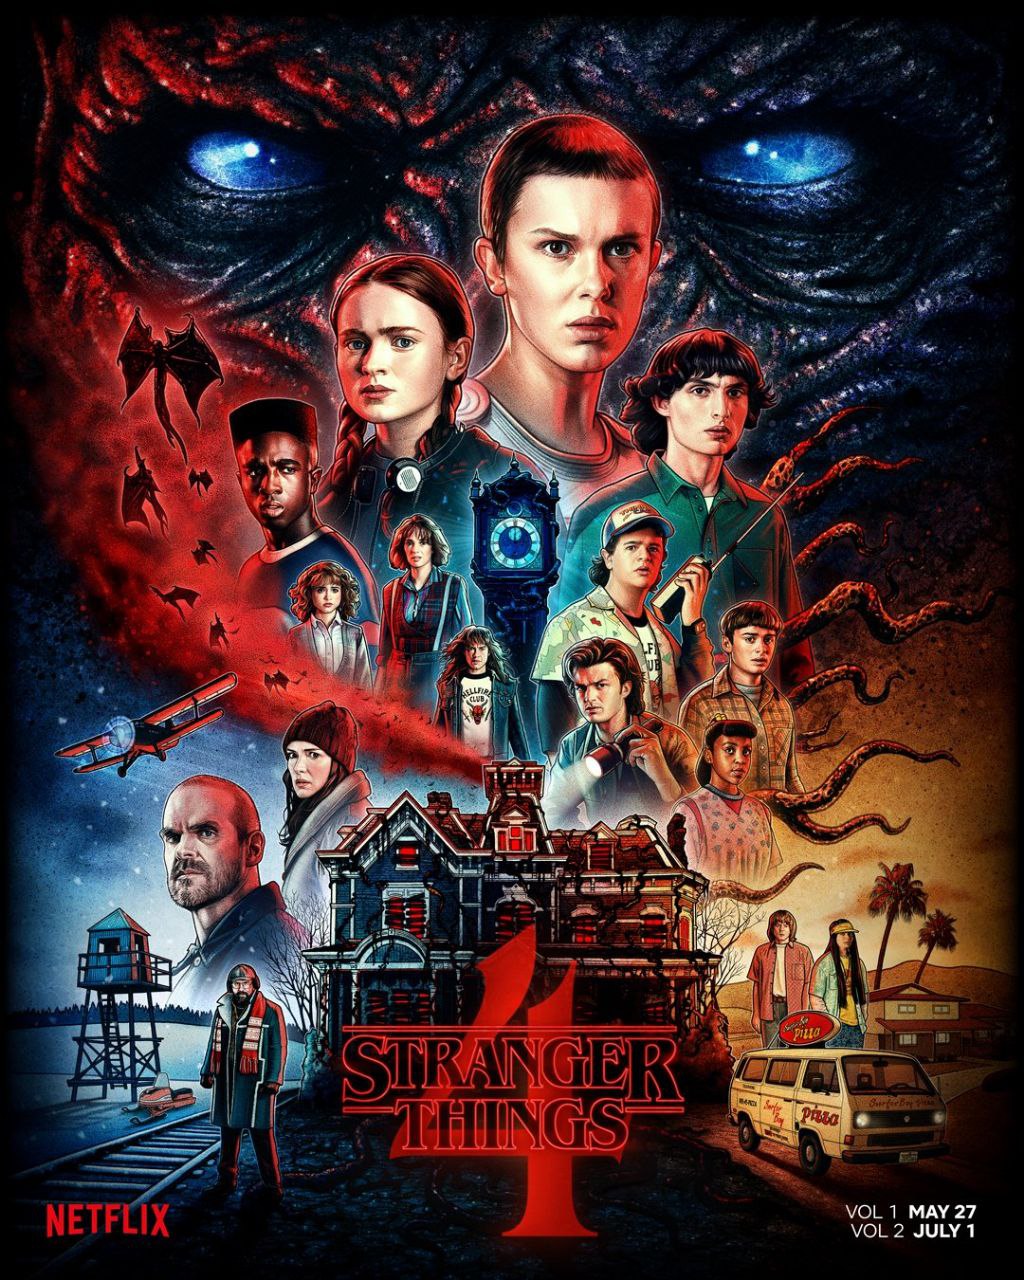 Stranger Things S4 (2022) Hindi Dubbed Completed Web Series HD